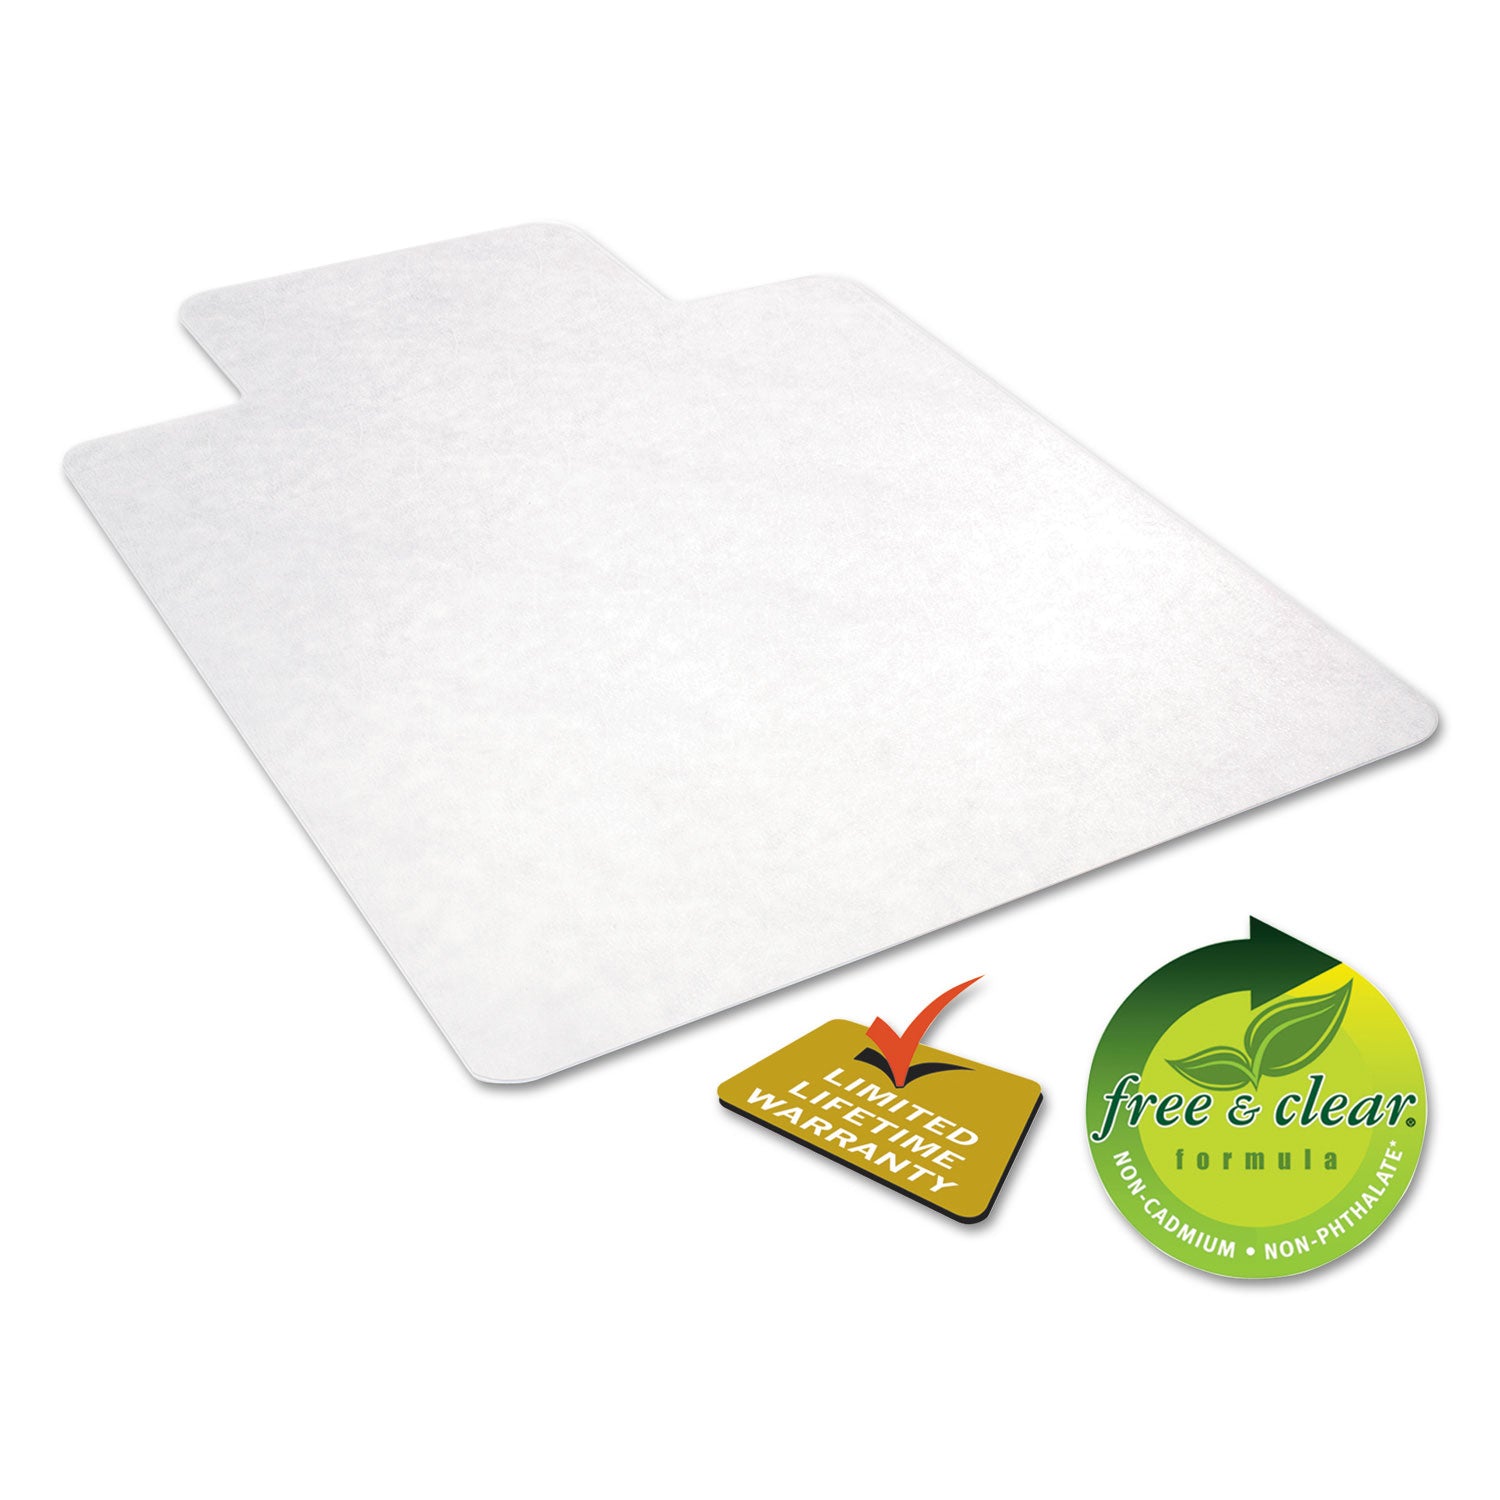 all-day-use-non-studded-chair-mat-for-hard-floors-45-x-53-wide-lipped-clear_alemat4553hfl - 5